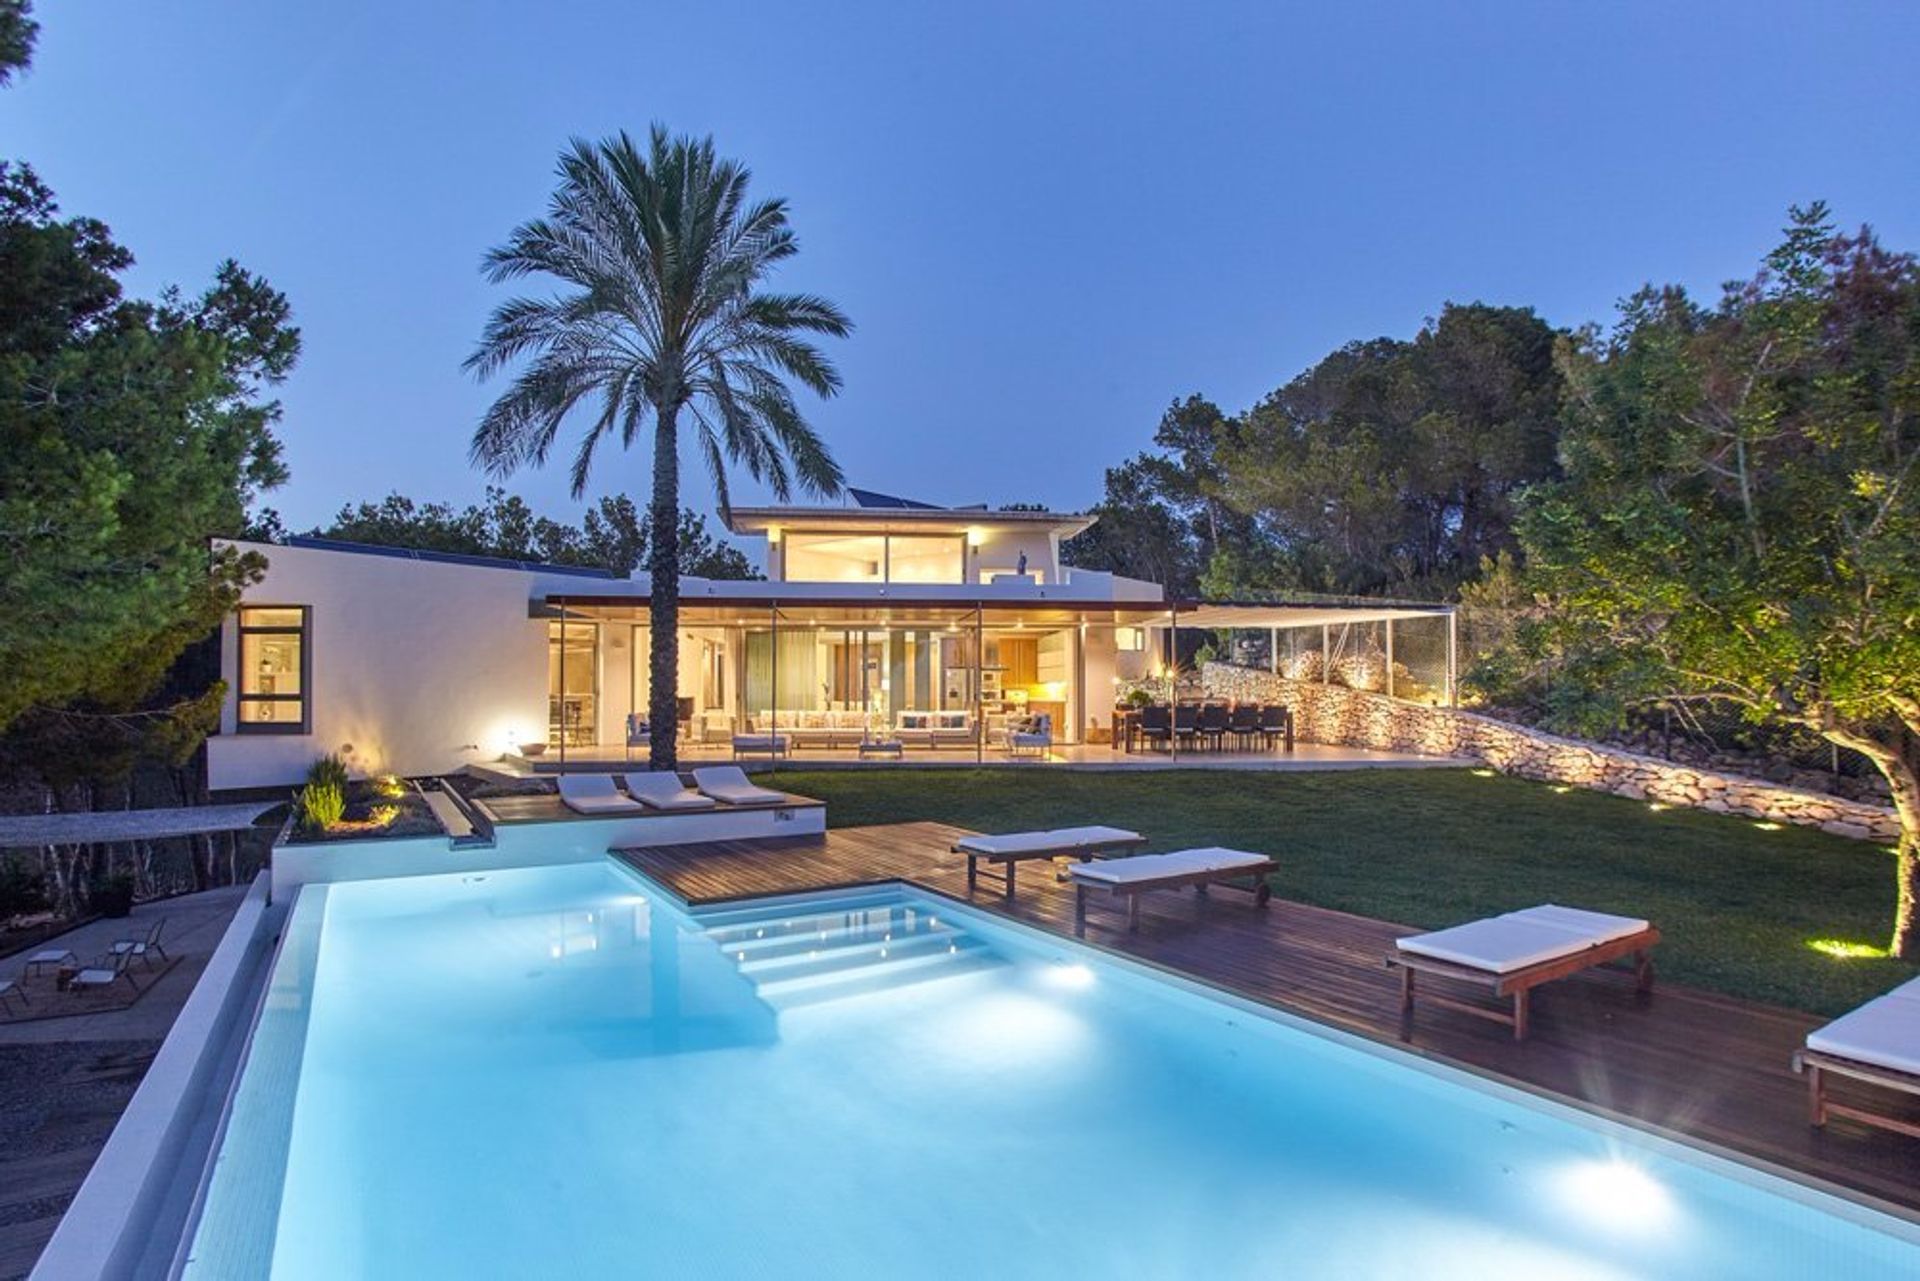 A stunning five bedroom five bathroom villa with a private pool in San Antoni